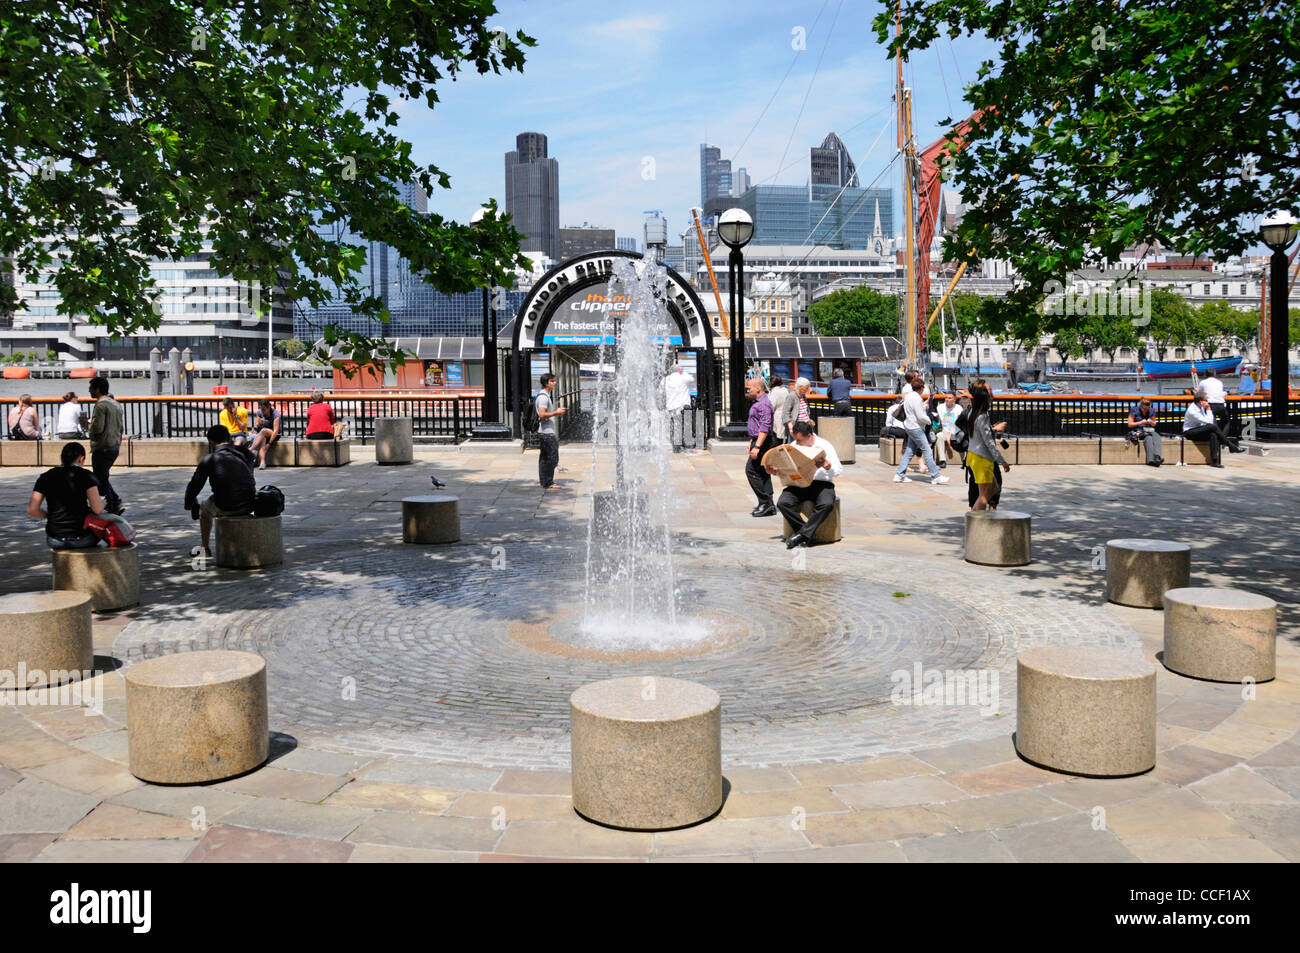 Fountain water feature & paved area outside entrance to London Bridge City pier beside the River Thames with city skyline beyond Southwark London UK Stock Photo